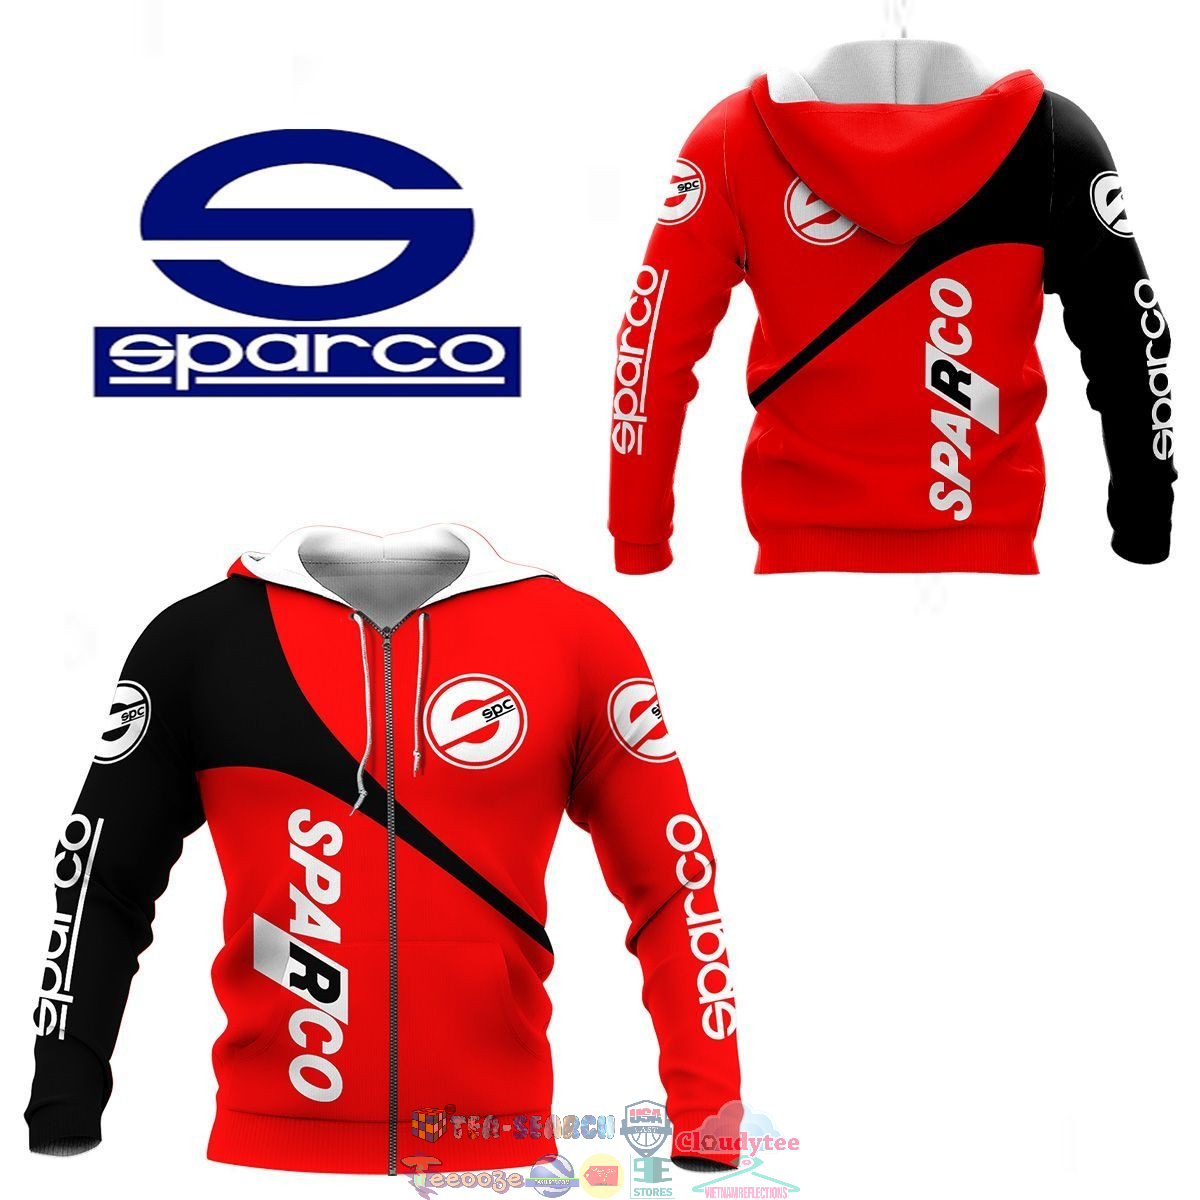 Sparco ver 36 3D hoodie and t-shirt